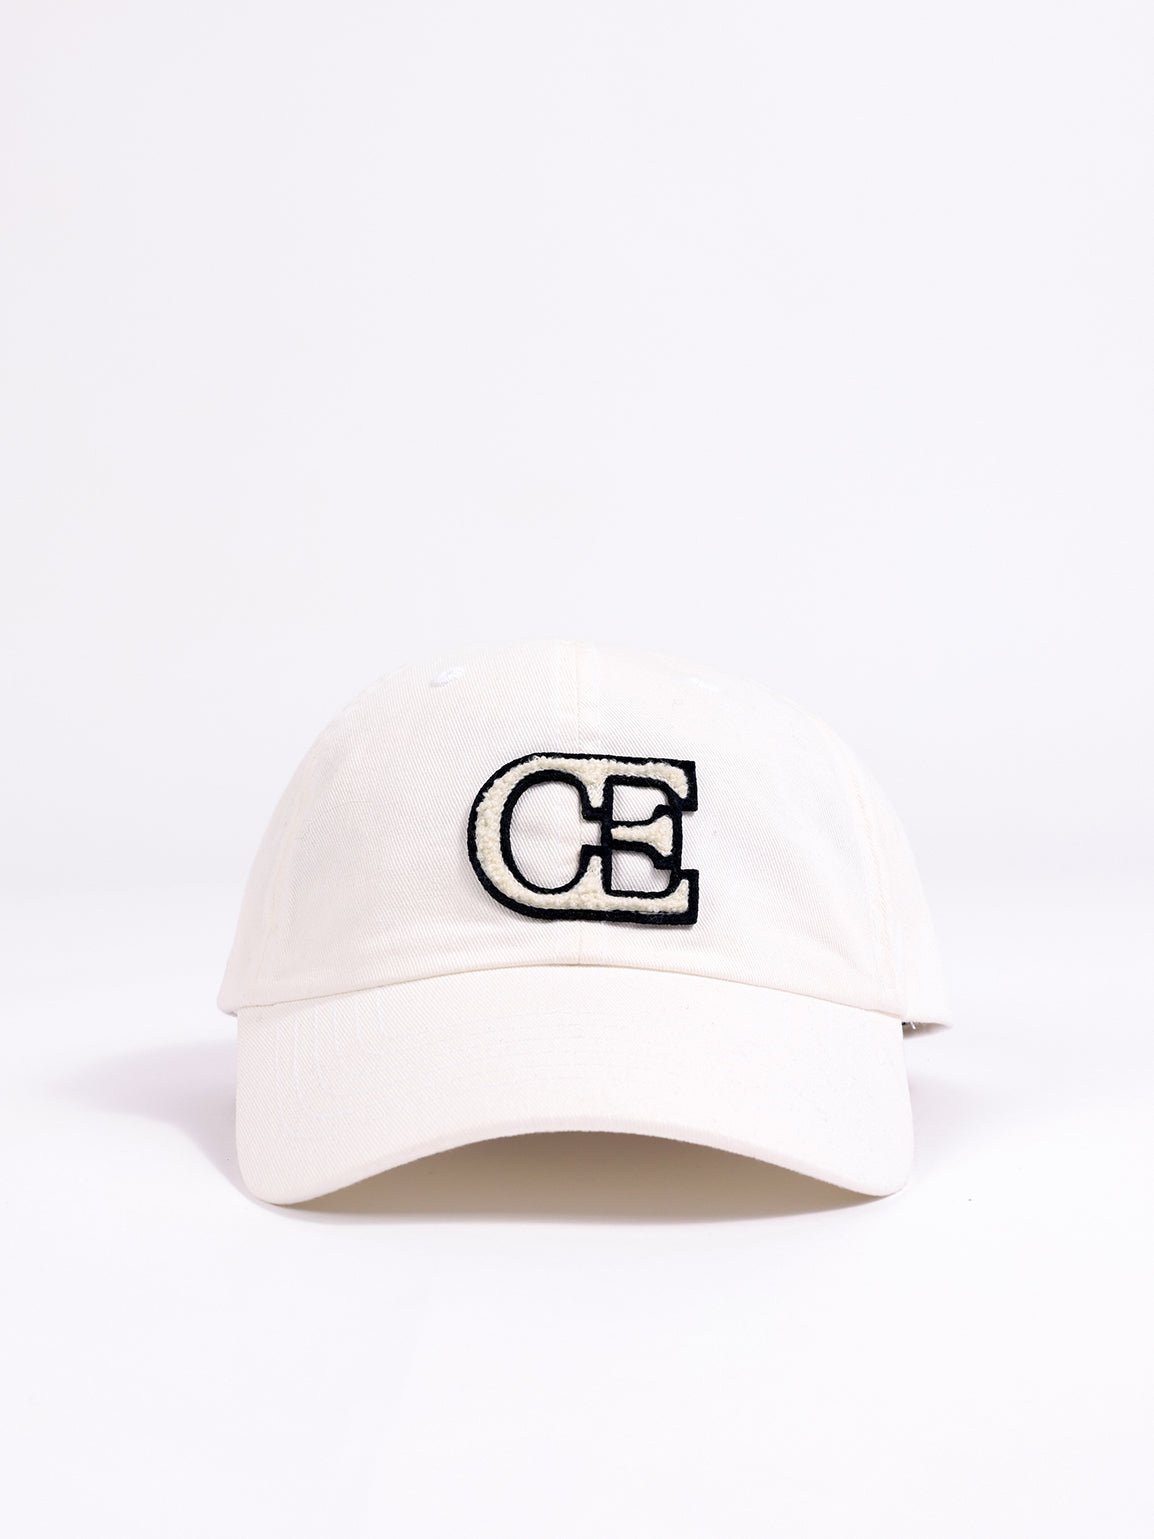 Washed cream vintage cap with white background 